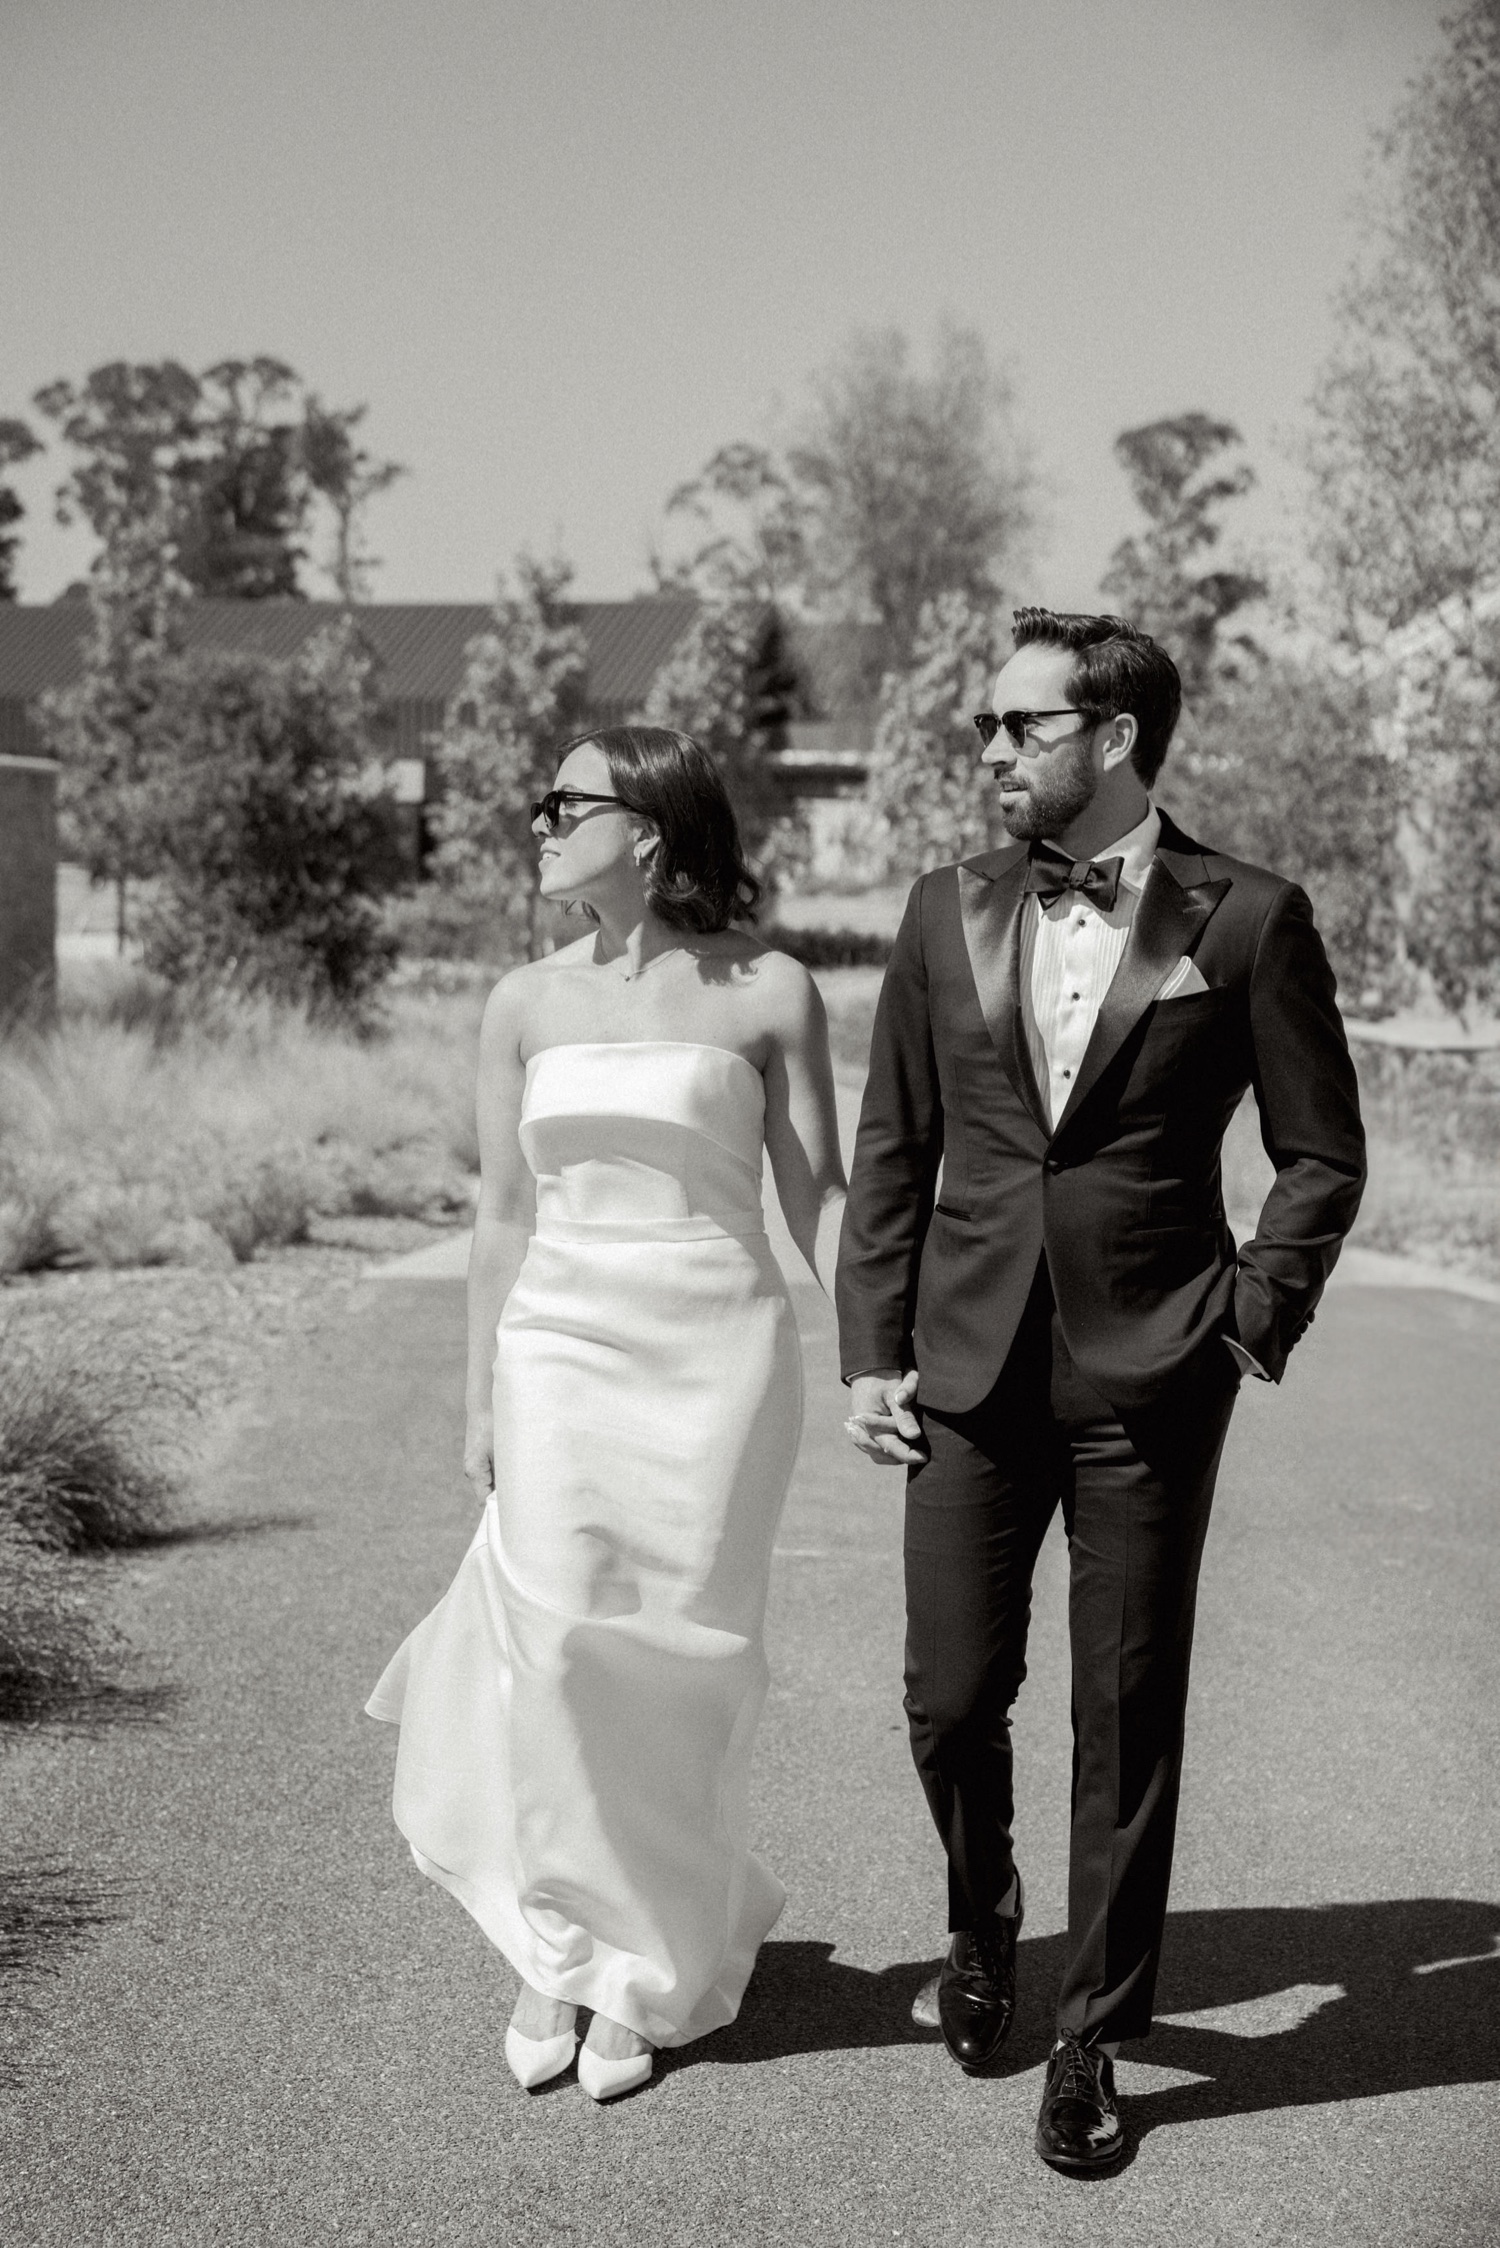 https://fetch.getnarrativeapp.com/static/84eaee5c-c132-445b-8f30-63f36282a9d9/bride-in-sunglasses-and-strapless-white-gown-walking-with-groom-on-Stanly-Ranch-wedding-day.jpg?w=1500